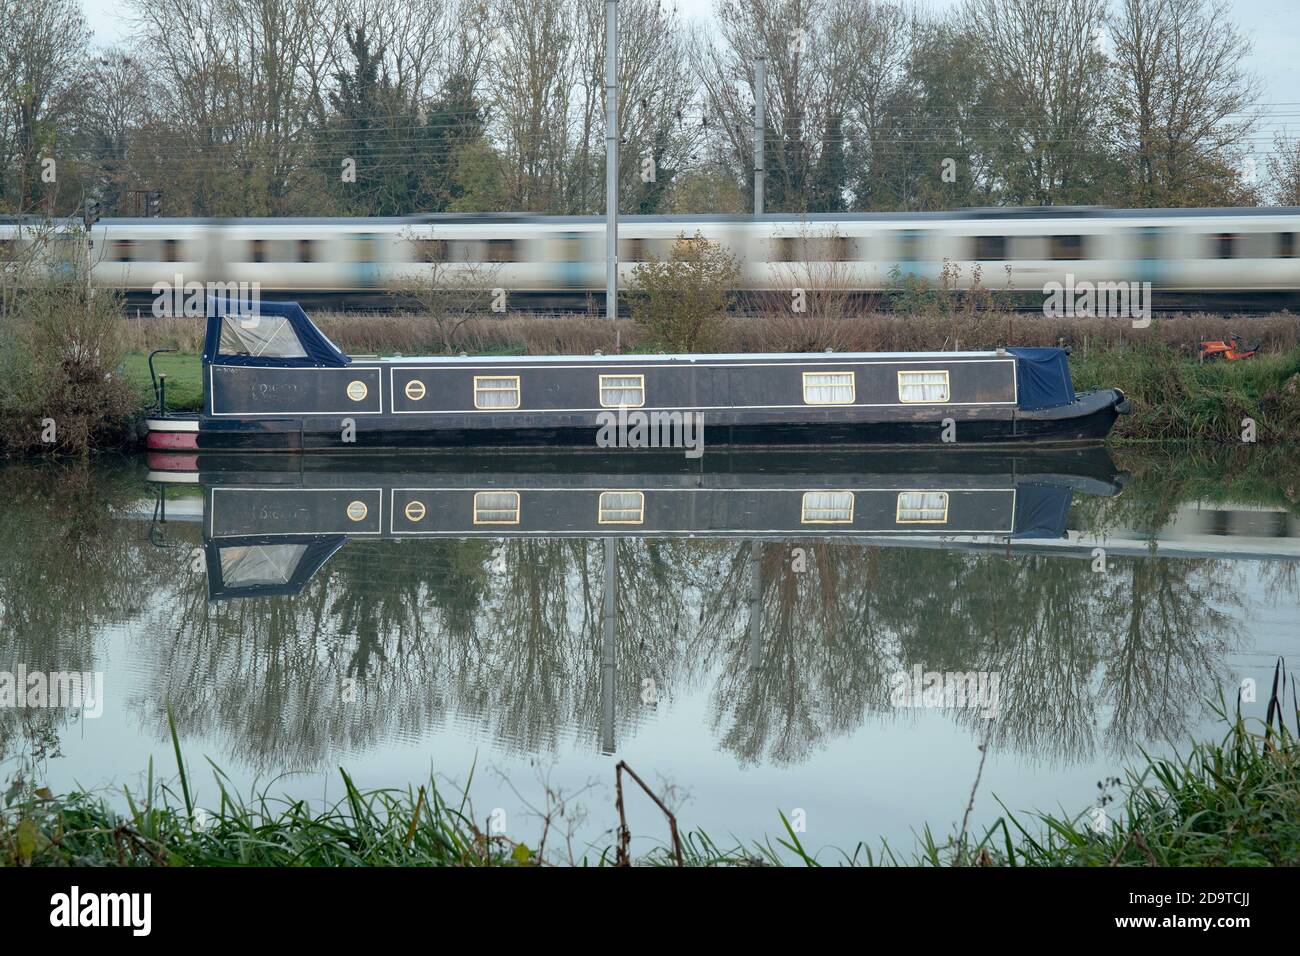 A narrowboat is moored along the River Great Ouse at Buckden in Cambridgeshire, as a commuter train heads along the East Coast mainline. Stock Photo